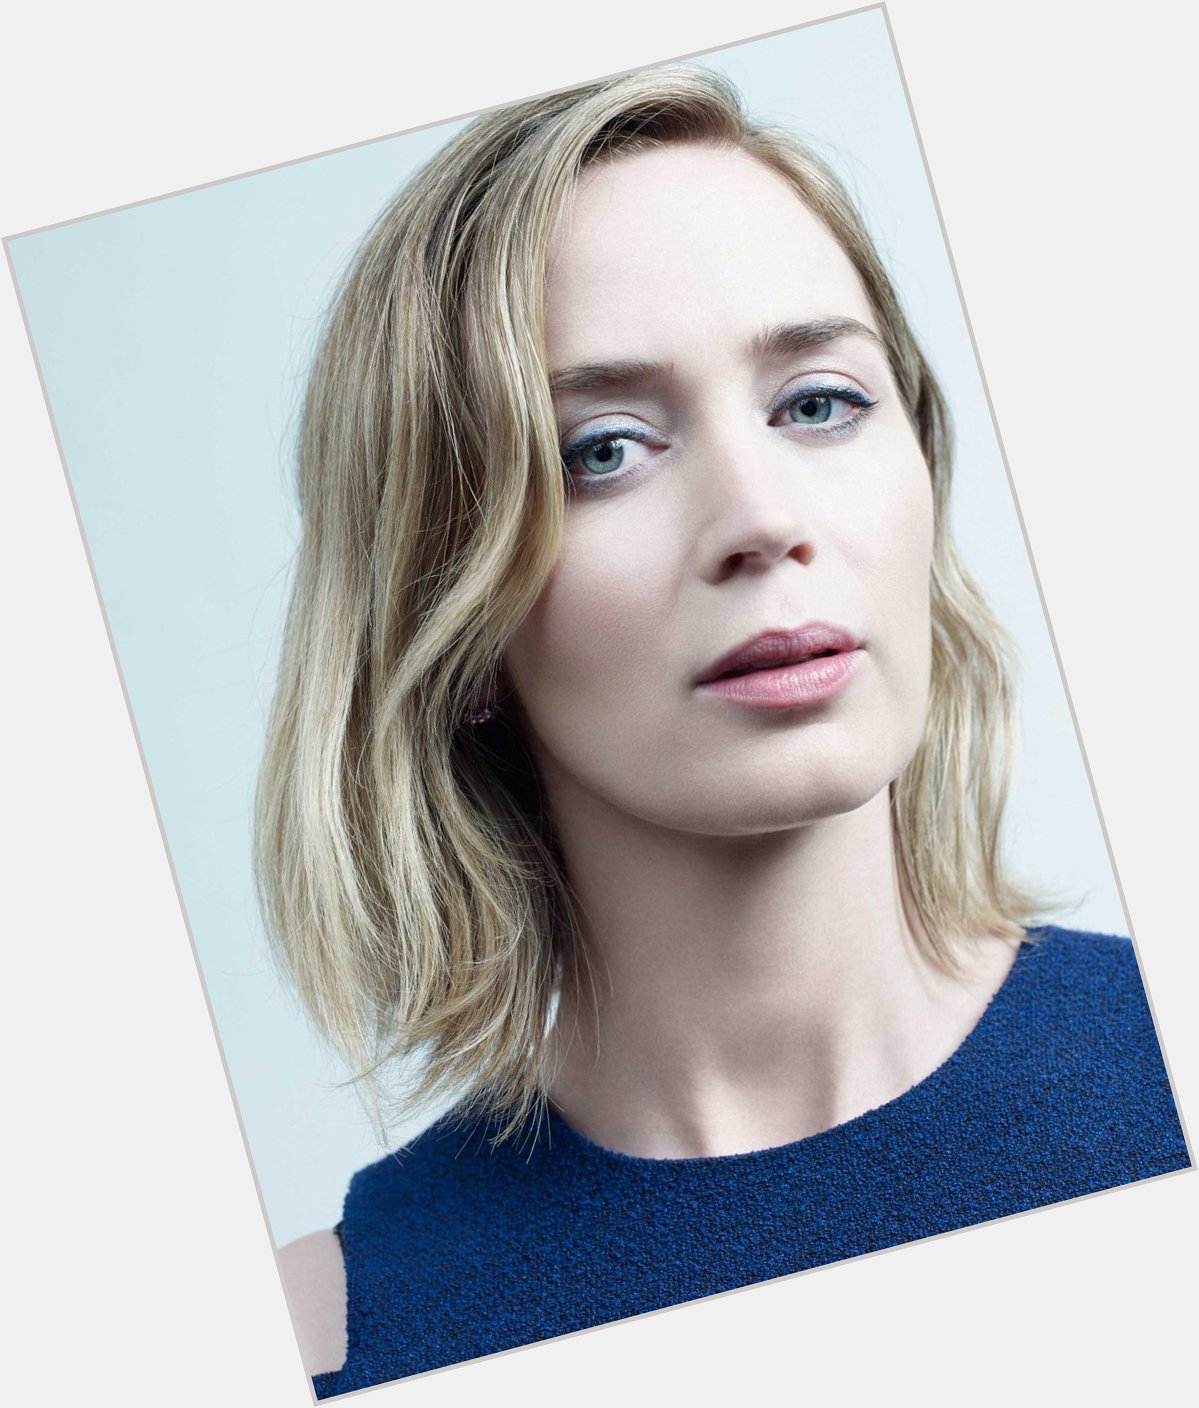 Happy Birthday to Emily Blunt and Kelly Macdonald. 
Hope you both have a wonderful day!   